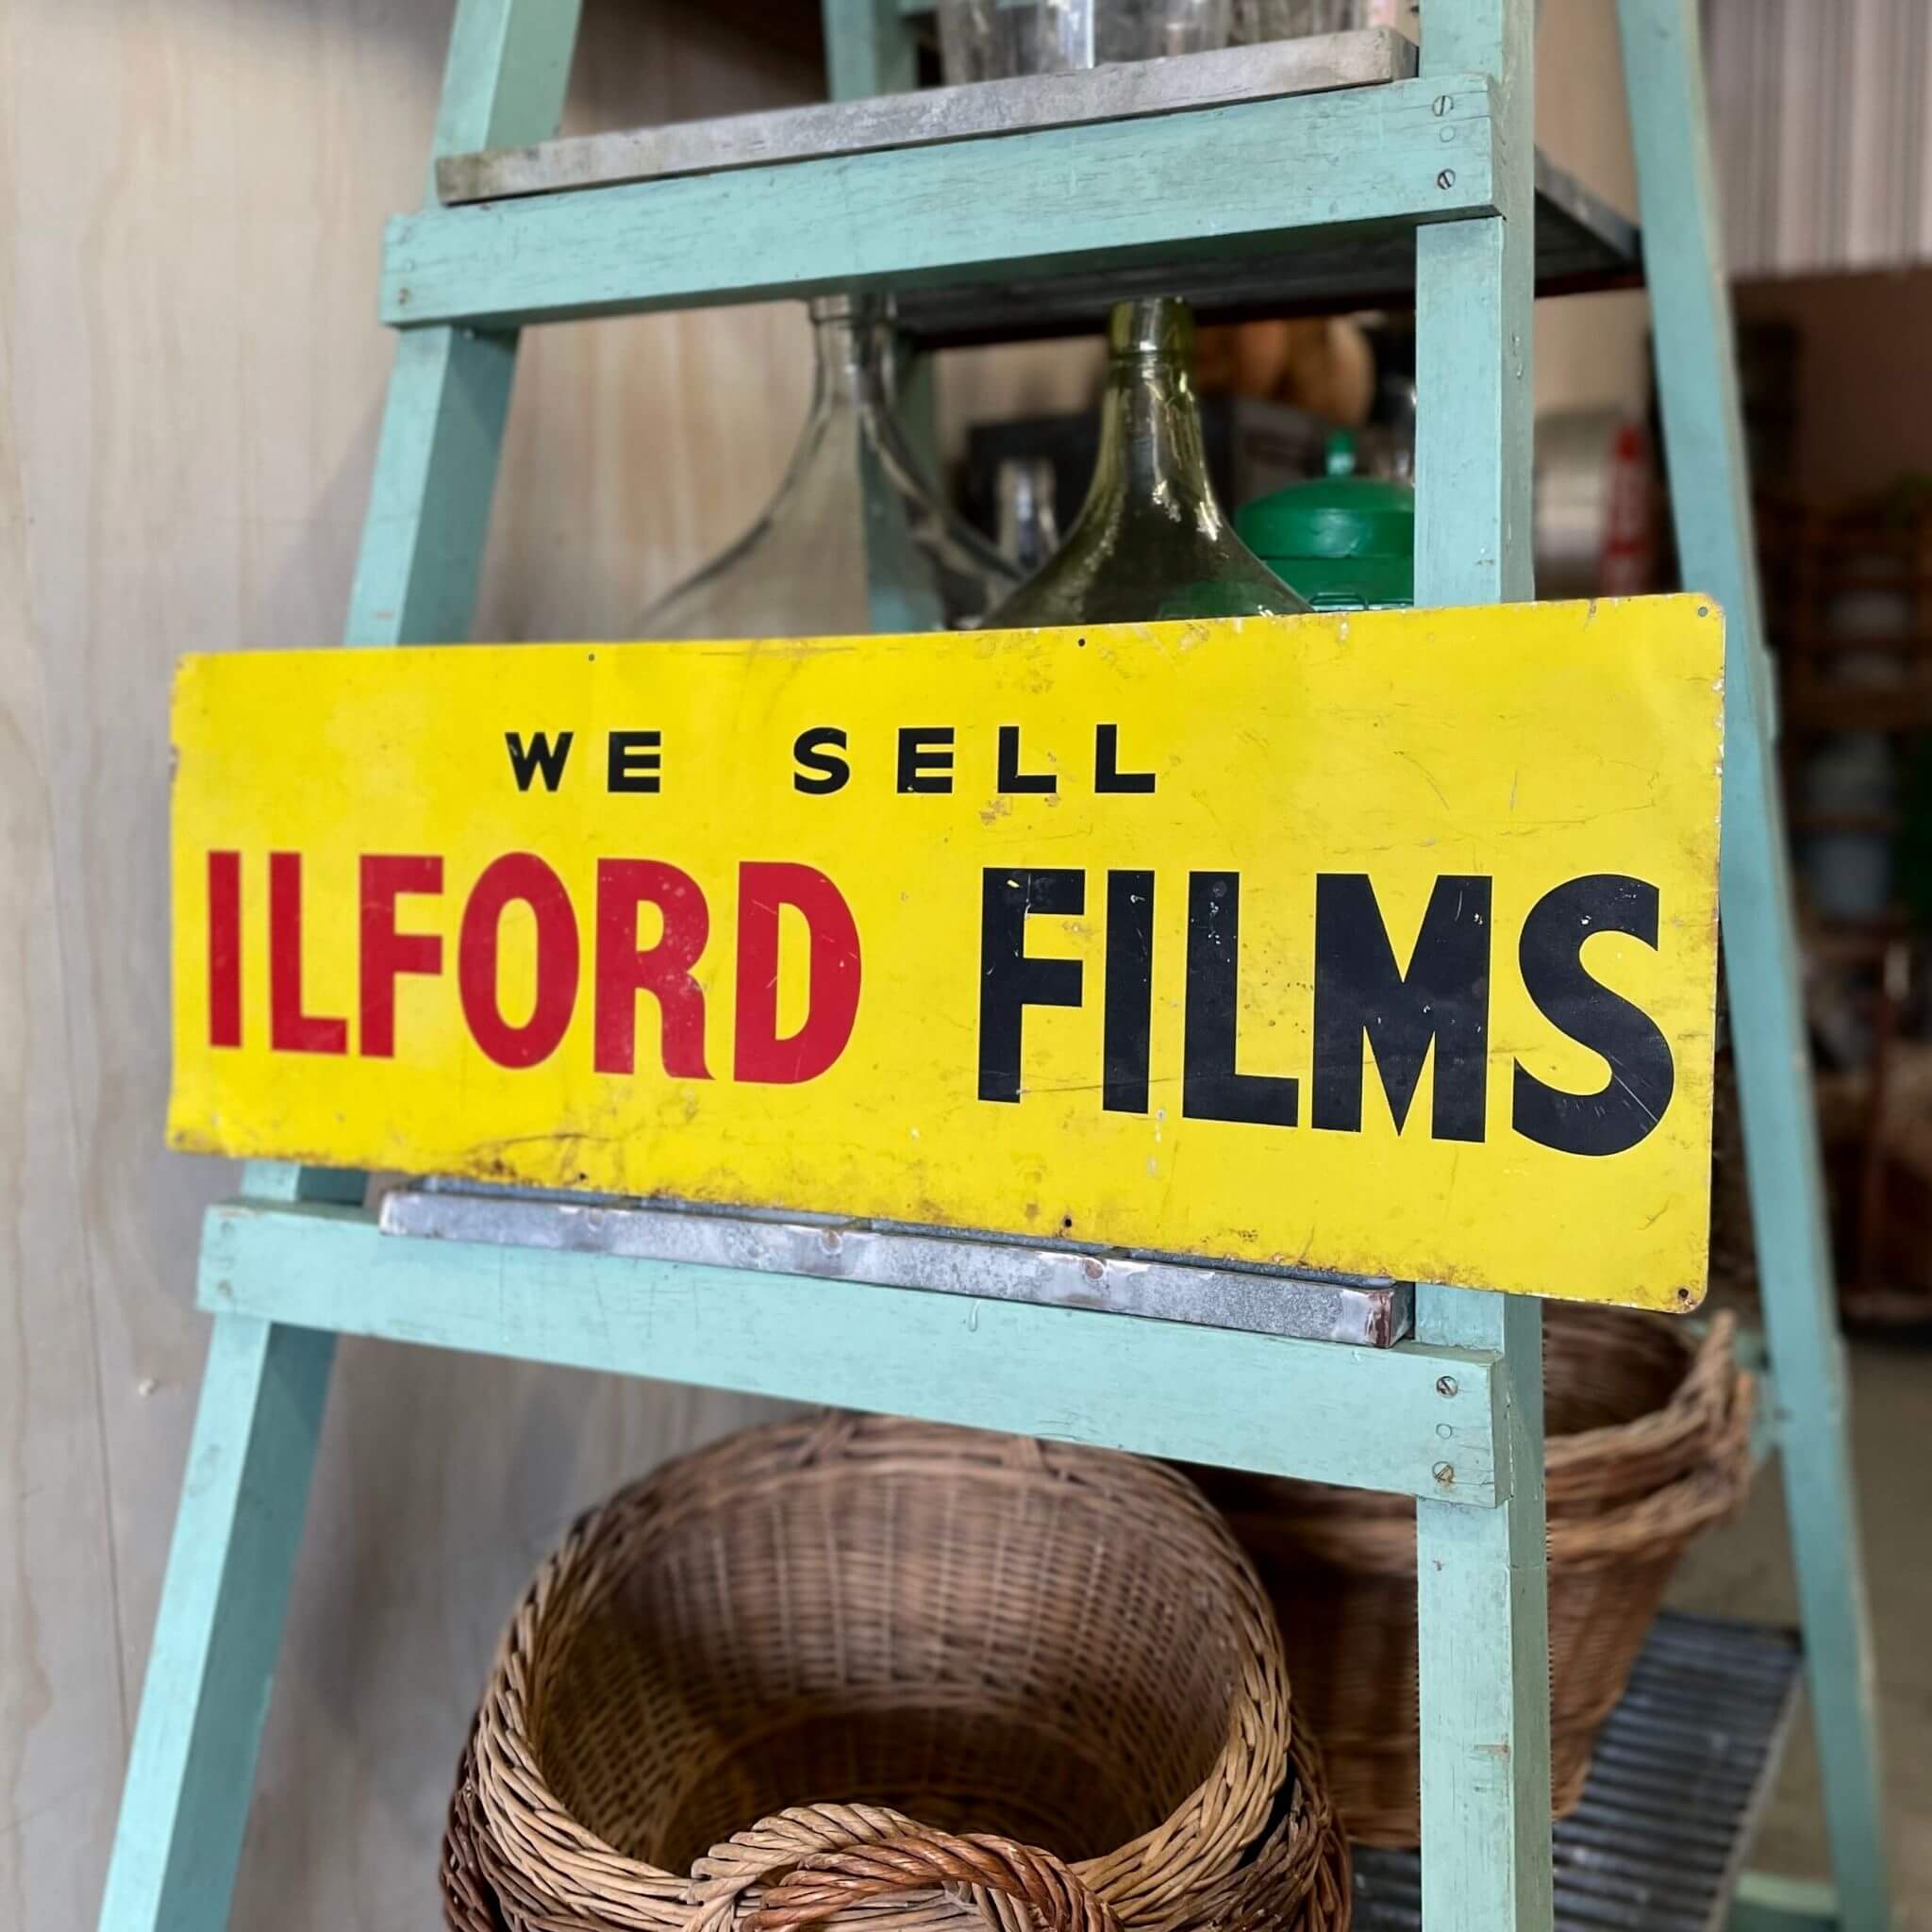 Ilford films antique tin sign